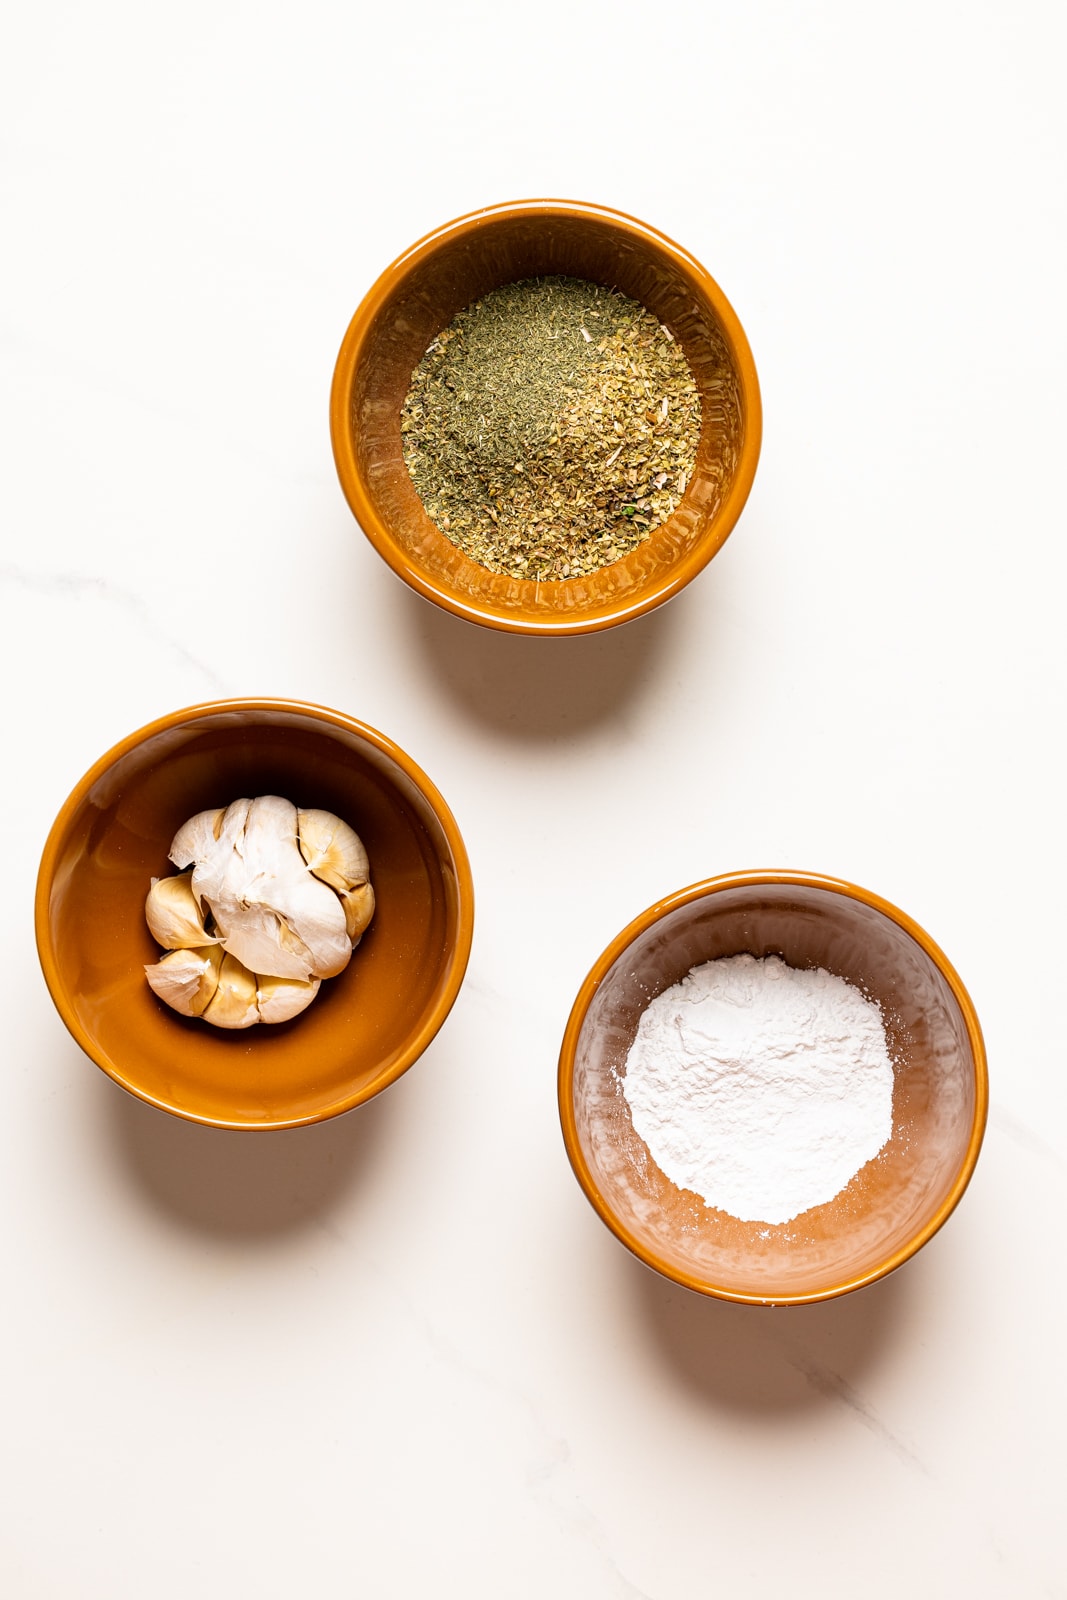 Garlic, herbs + seasonings, and baking powder in brown pinch bowls on a marble table.